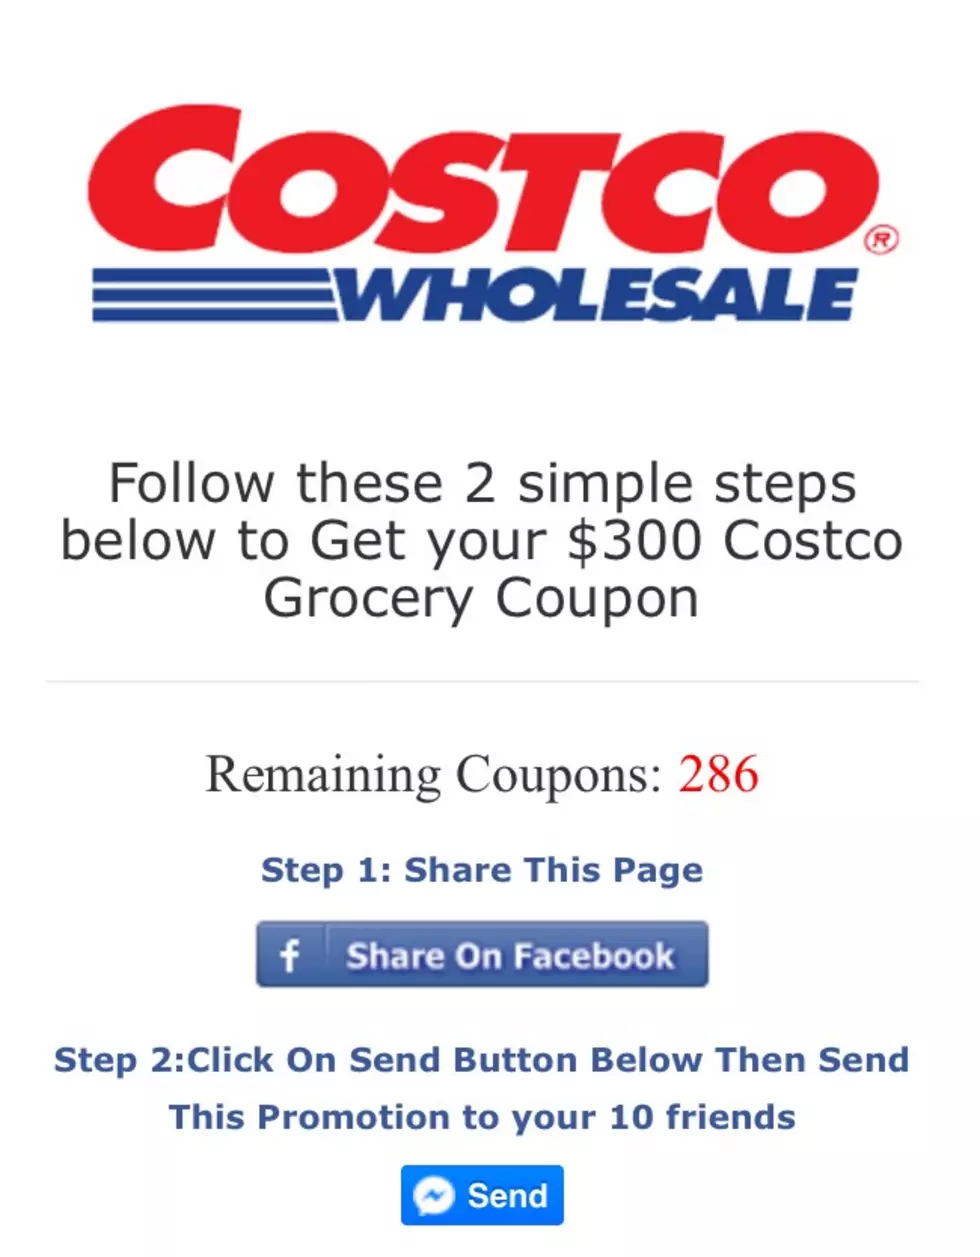 Costco Is NOT Giving Away $300 Grocery Coupons